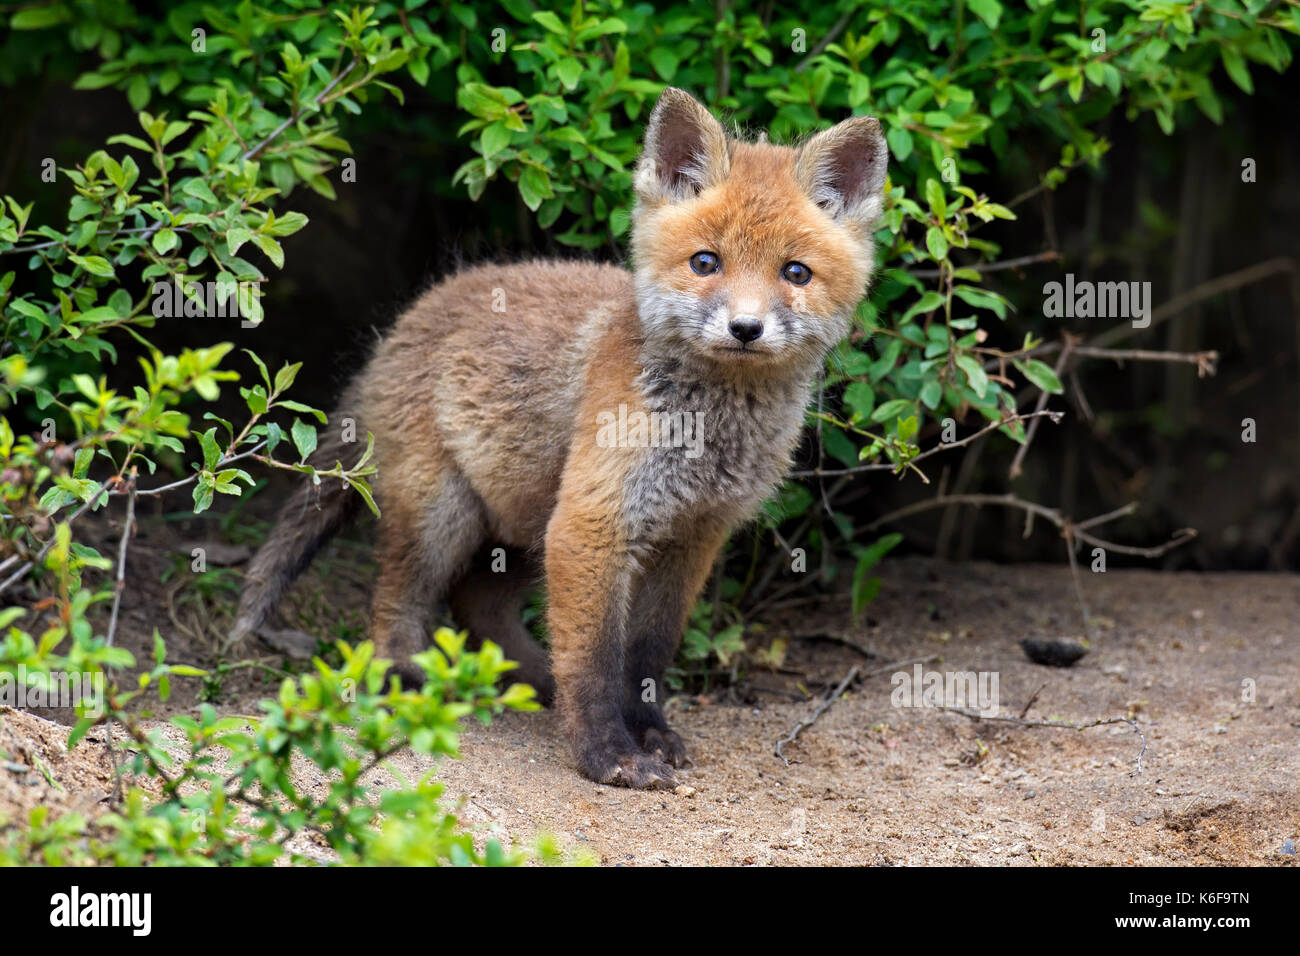 Young cute red fox (Vulpes vulpes), single kit emerging from thicket in spring Stock Photo